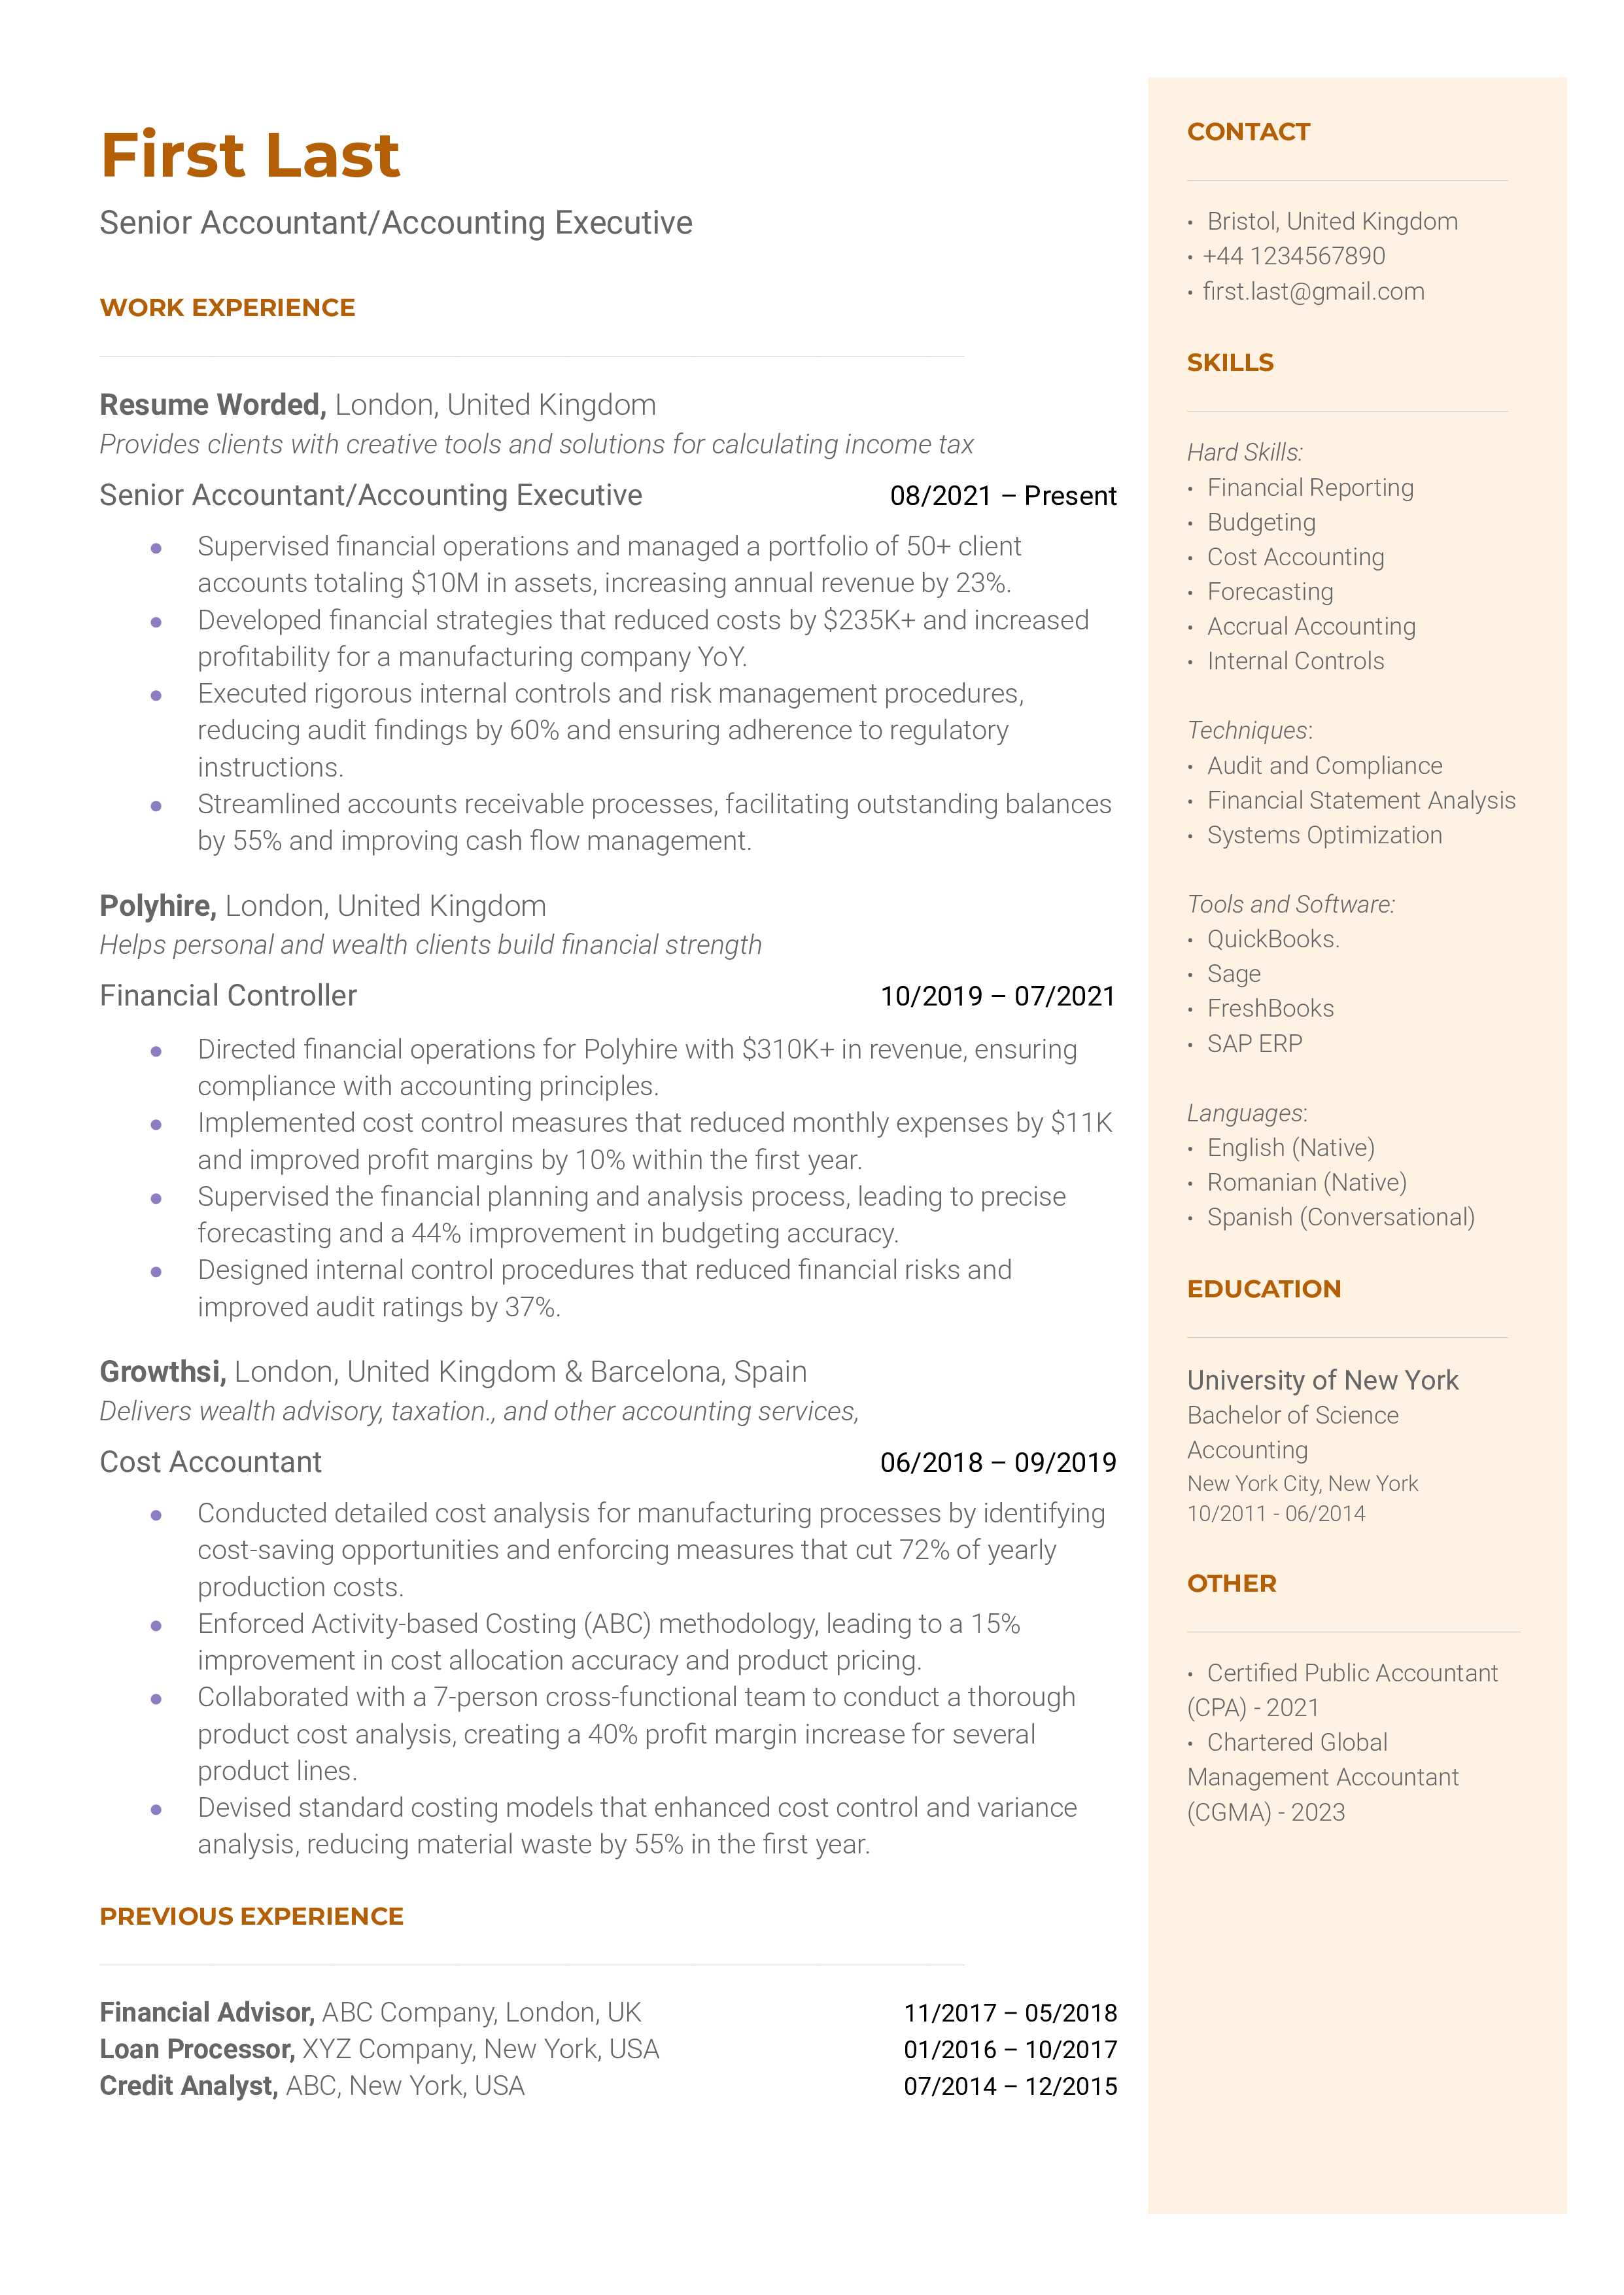 Senior Accountant's resume showcasing technical proficiency and leadership experience.